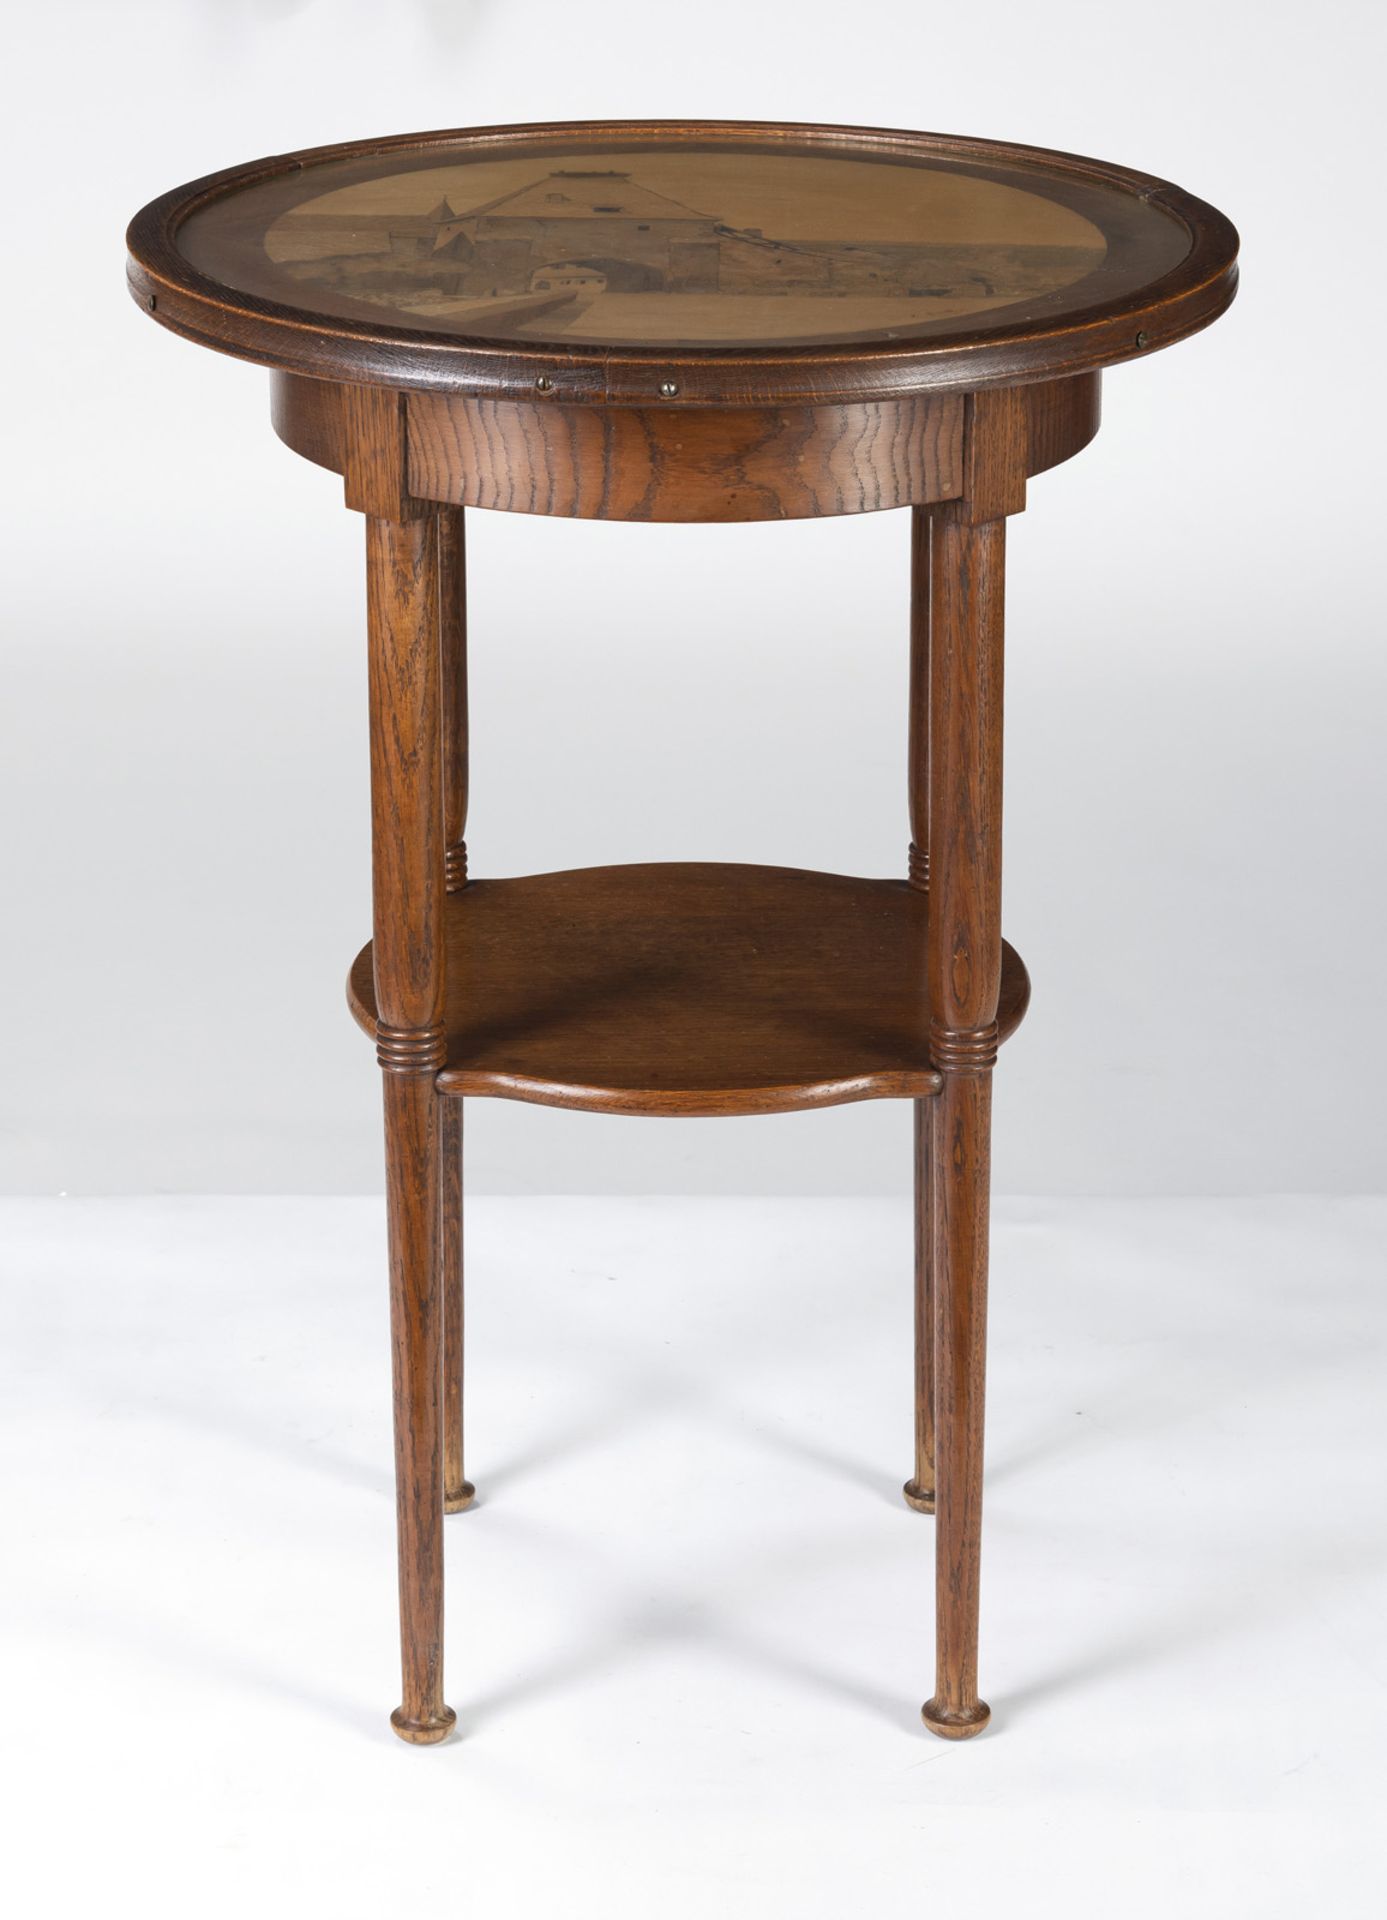 A FRENCH INLAID ART NOUVEAU OCCASIONAL TABLE - Image 5 of 5